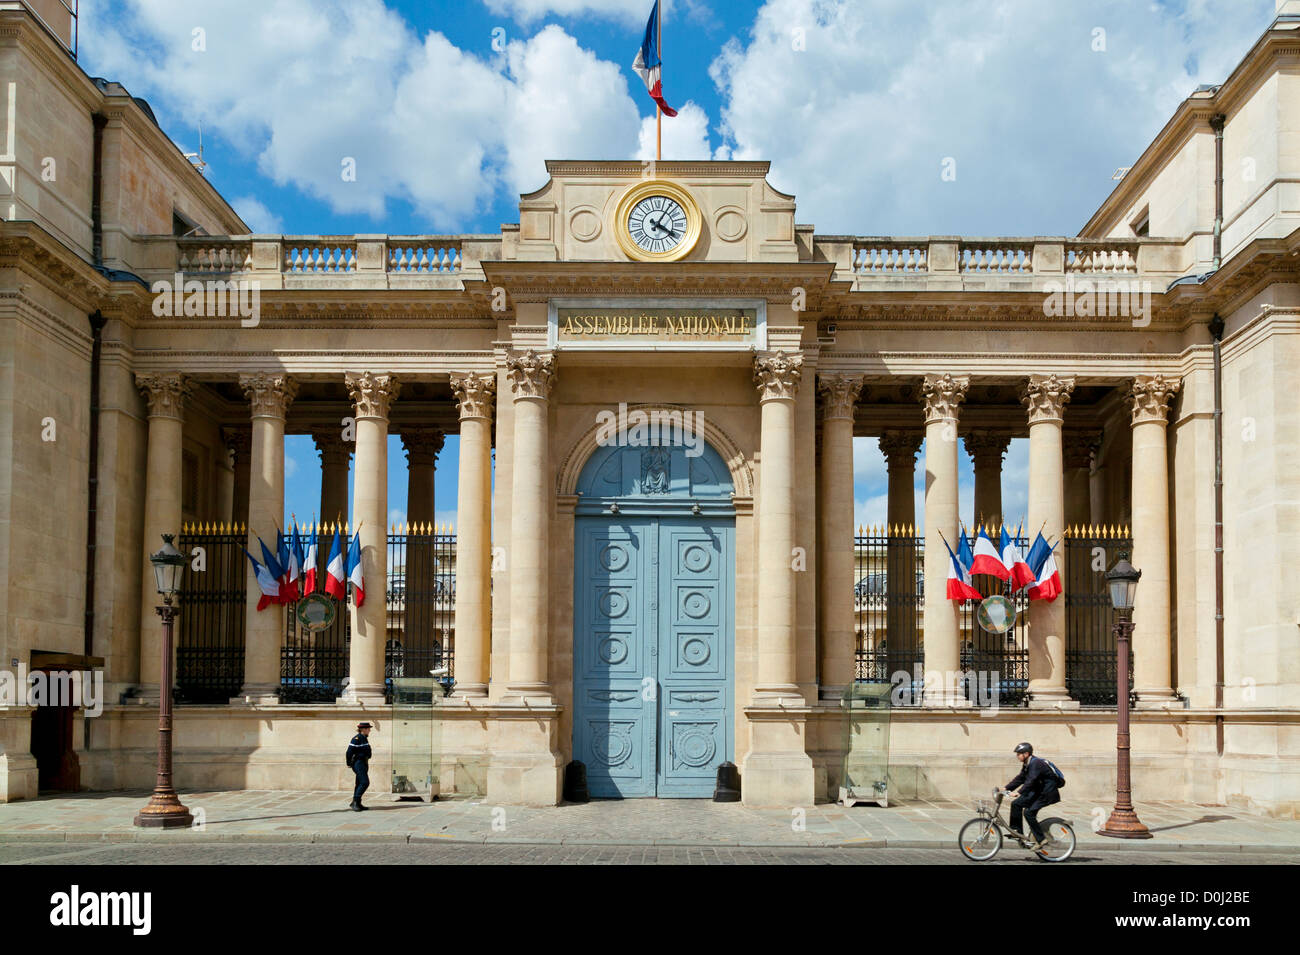 The National Assembly,Paris,France Stock Photo